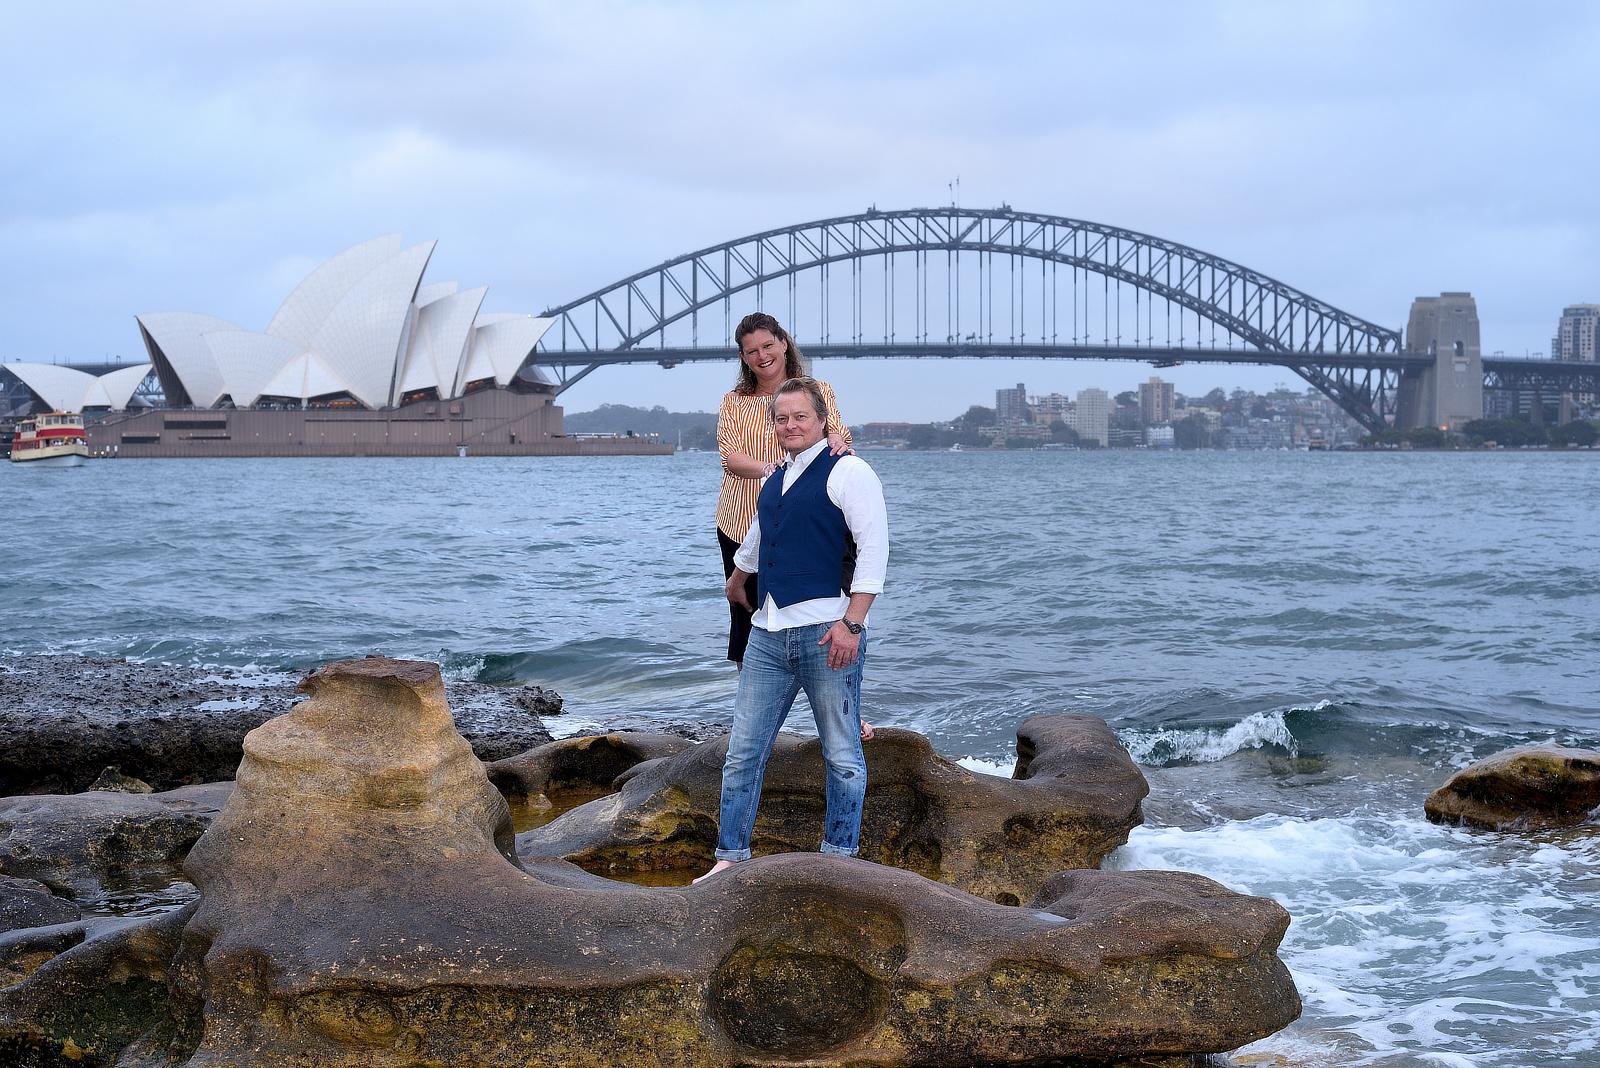 Professional Sydney Photographer and Tour Guide